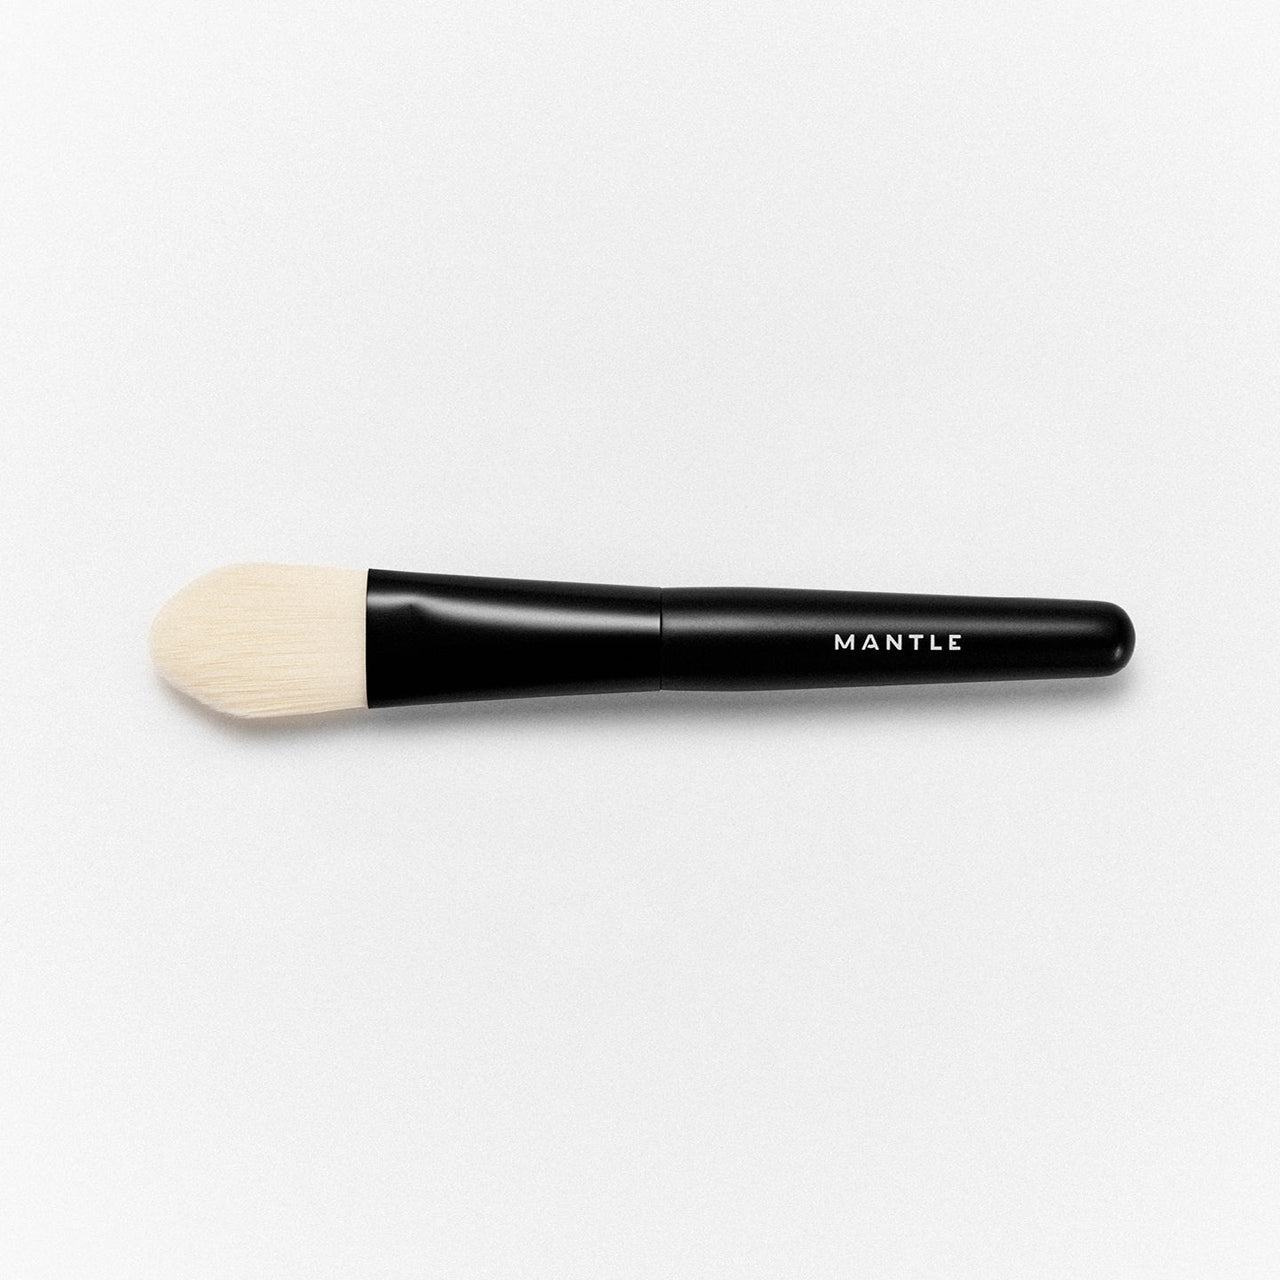 THE MASK BRUSH BY MANTLE